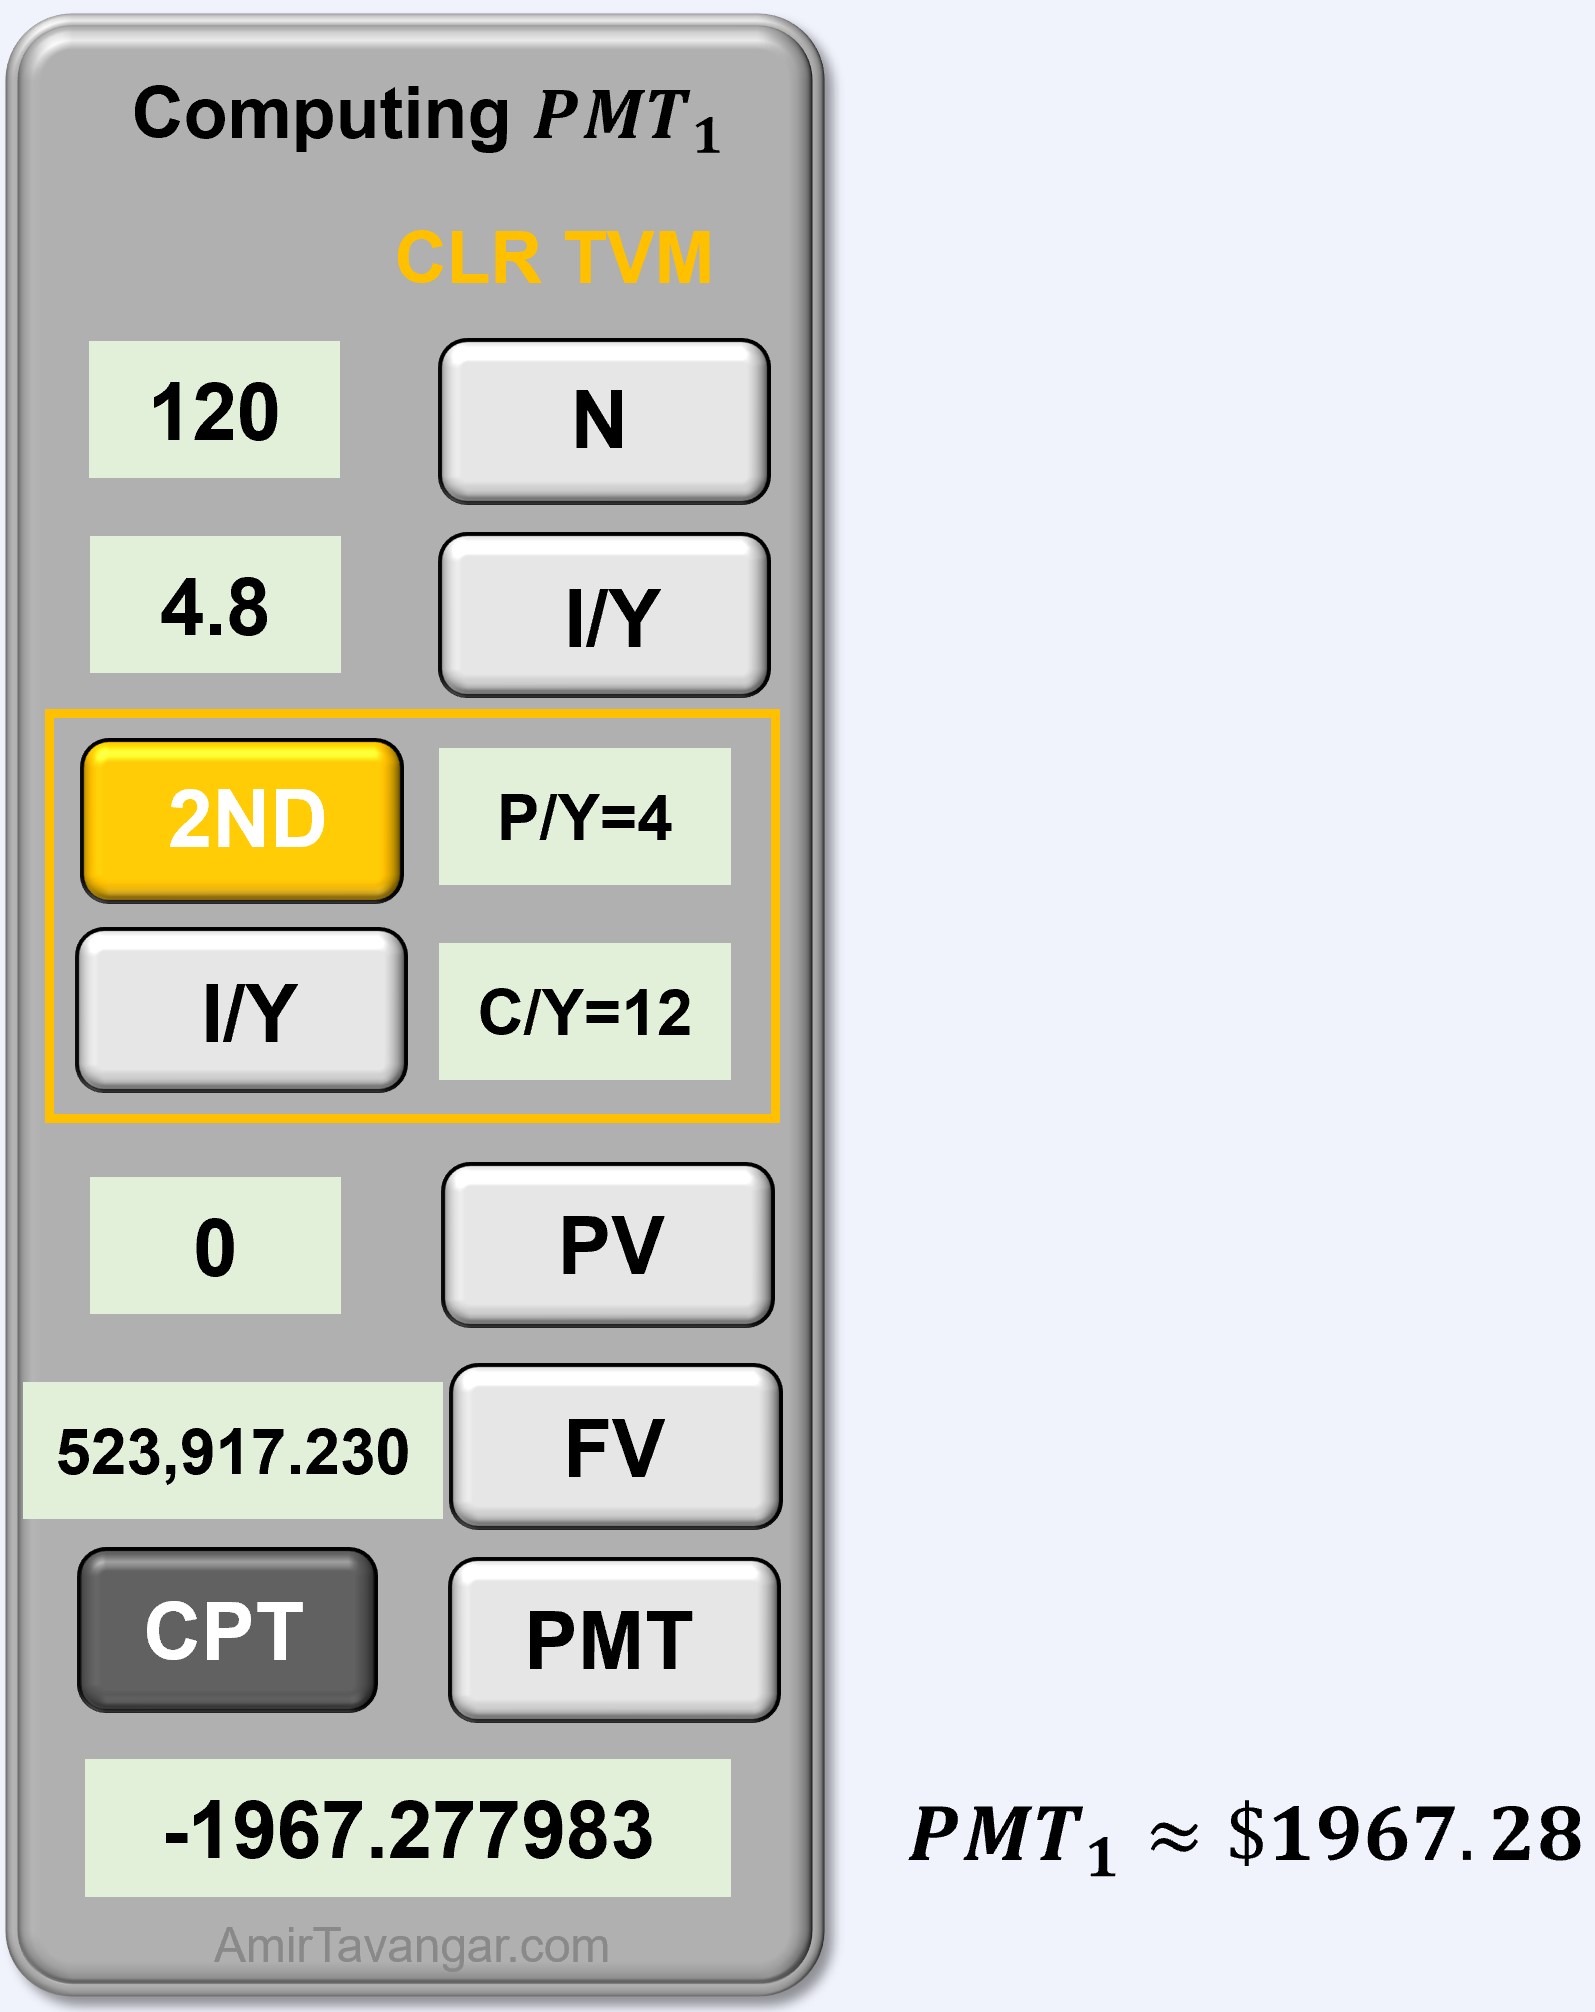 Visualization of a TVM worksheet for calculating required payments (PMT1) of RRSP term, using PV2, determined in Part (a) as future Value (FV1) with a positive sign for cash inflow. The steps include entering each given value, then pressing the corresponding key, and finalizing the PMT calculation by pressing the 'Compute' button followed by the PMT button.